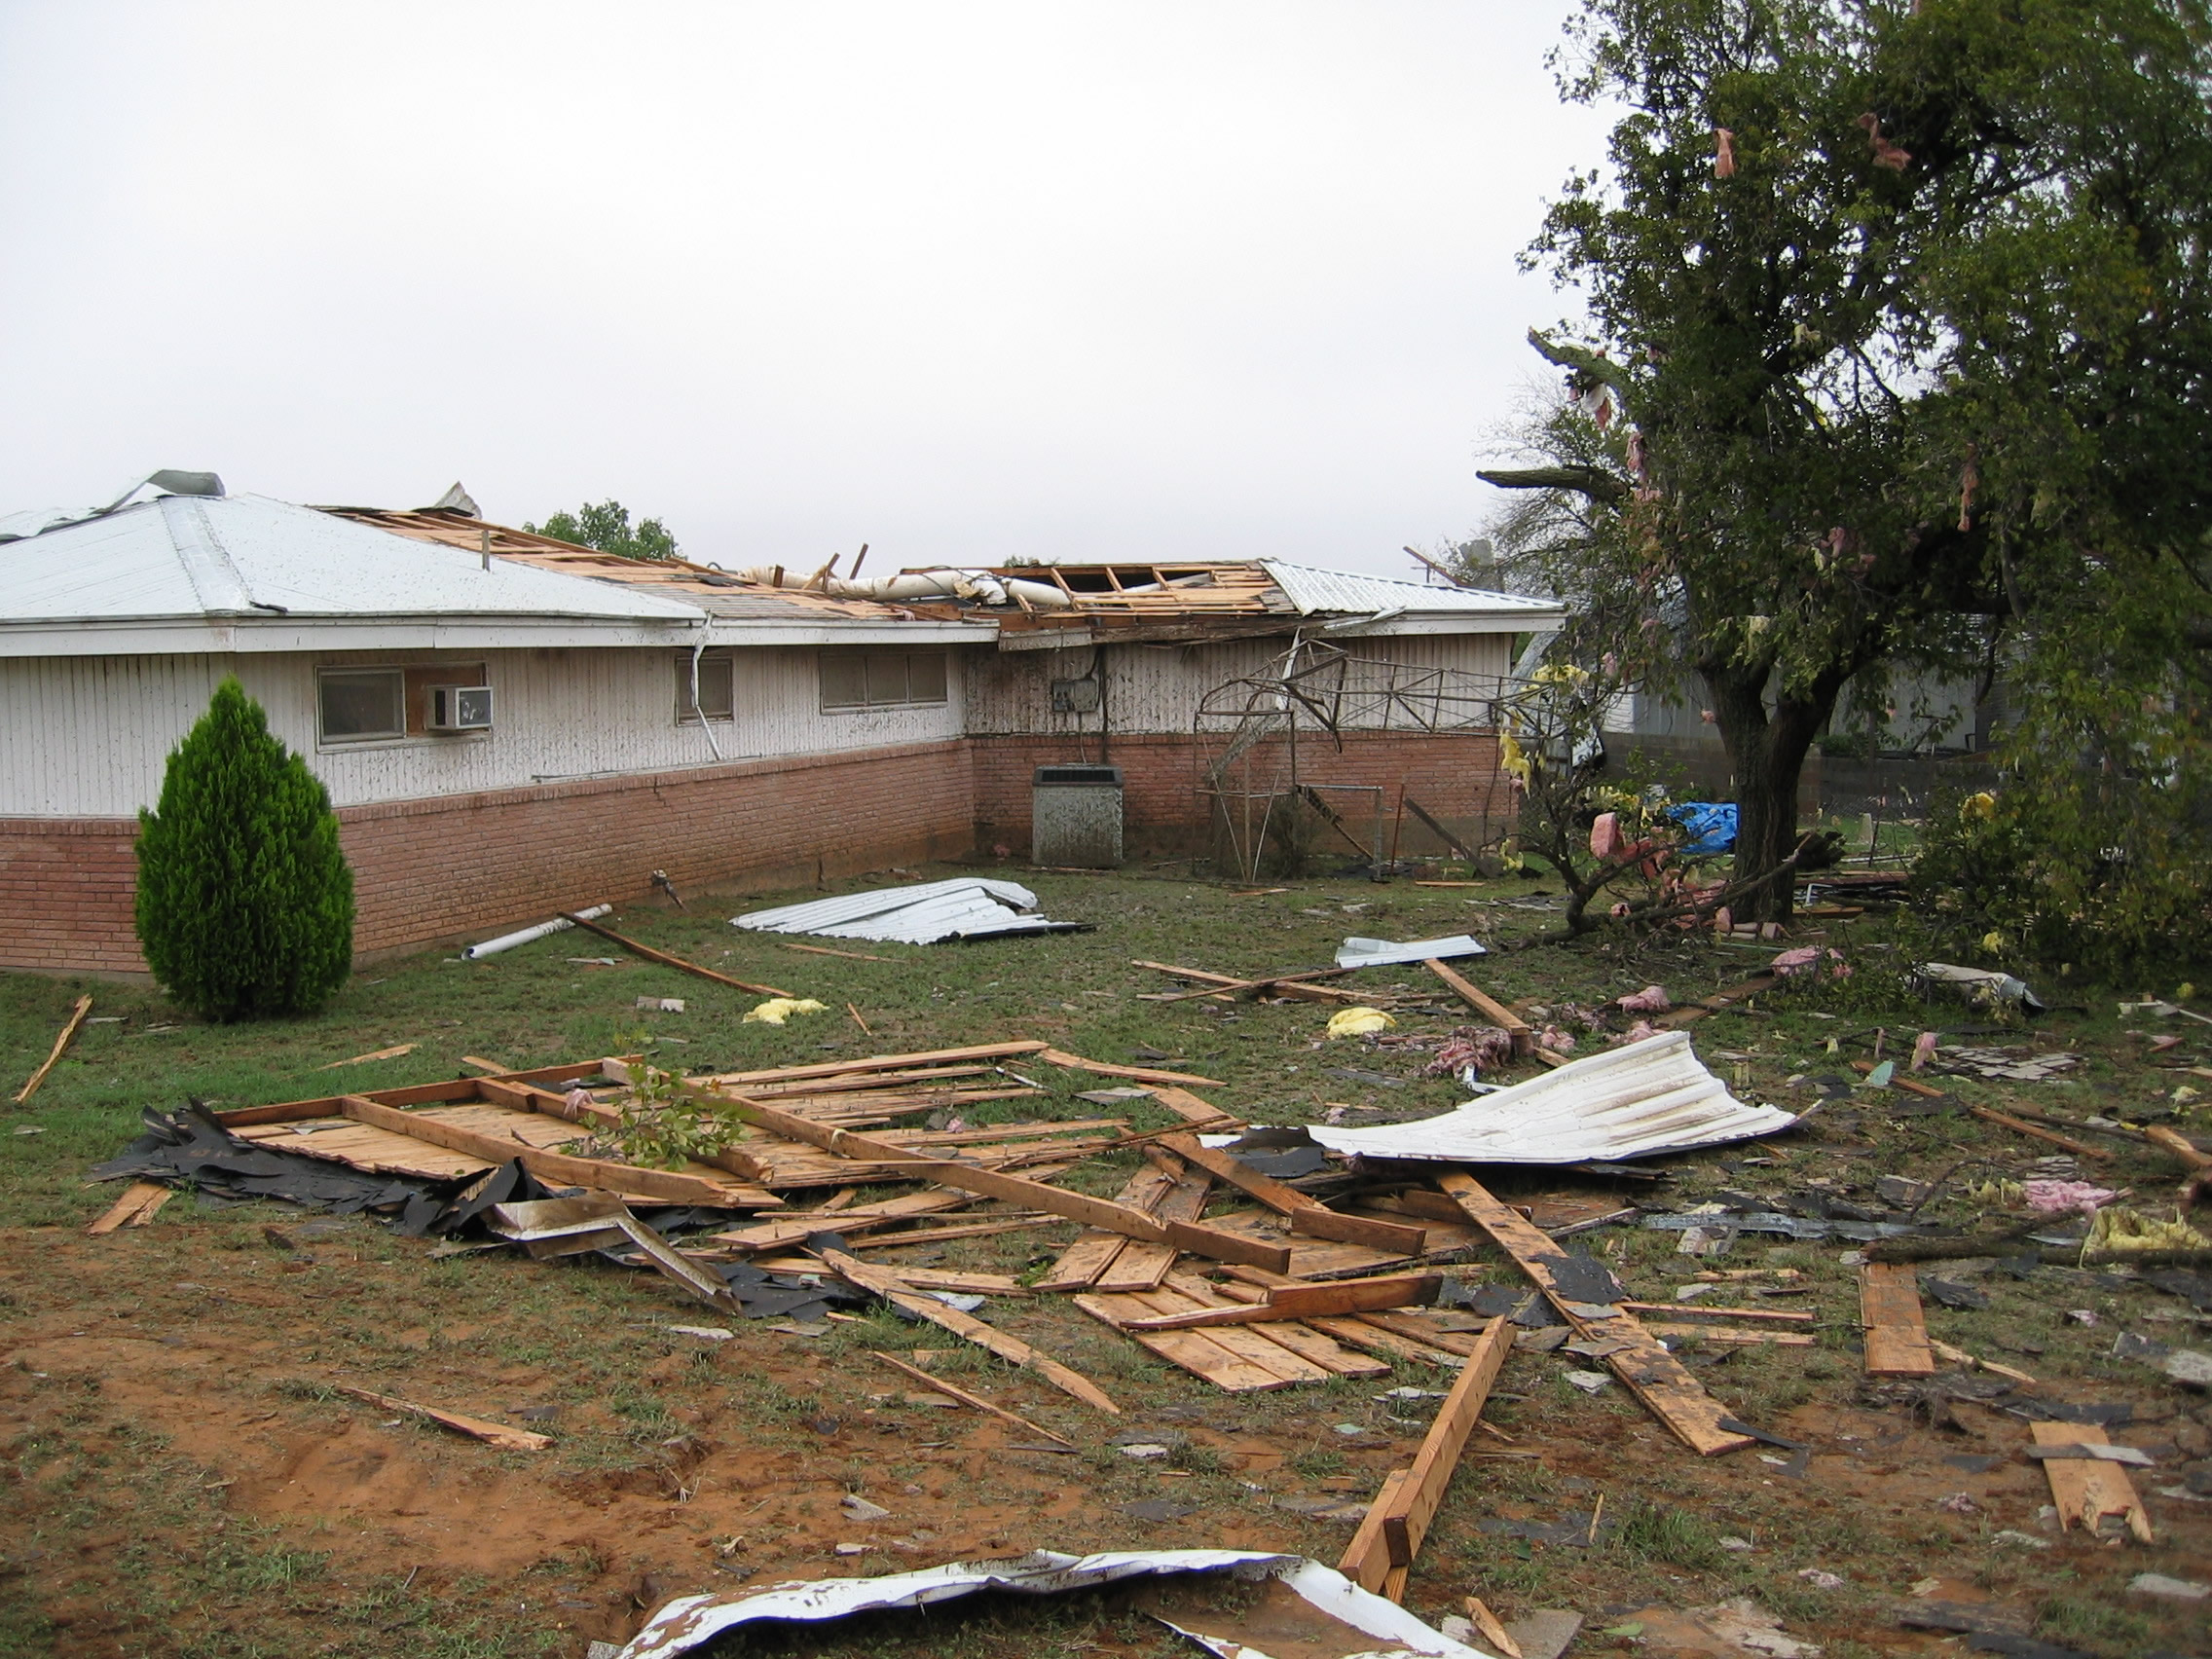 Second photo of house sustaining F1 tornado damage showing roof blown from the house.